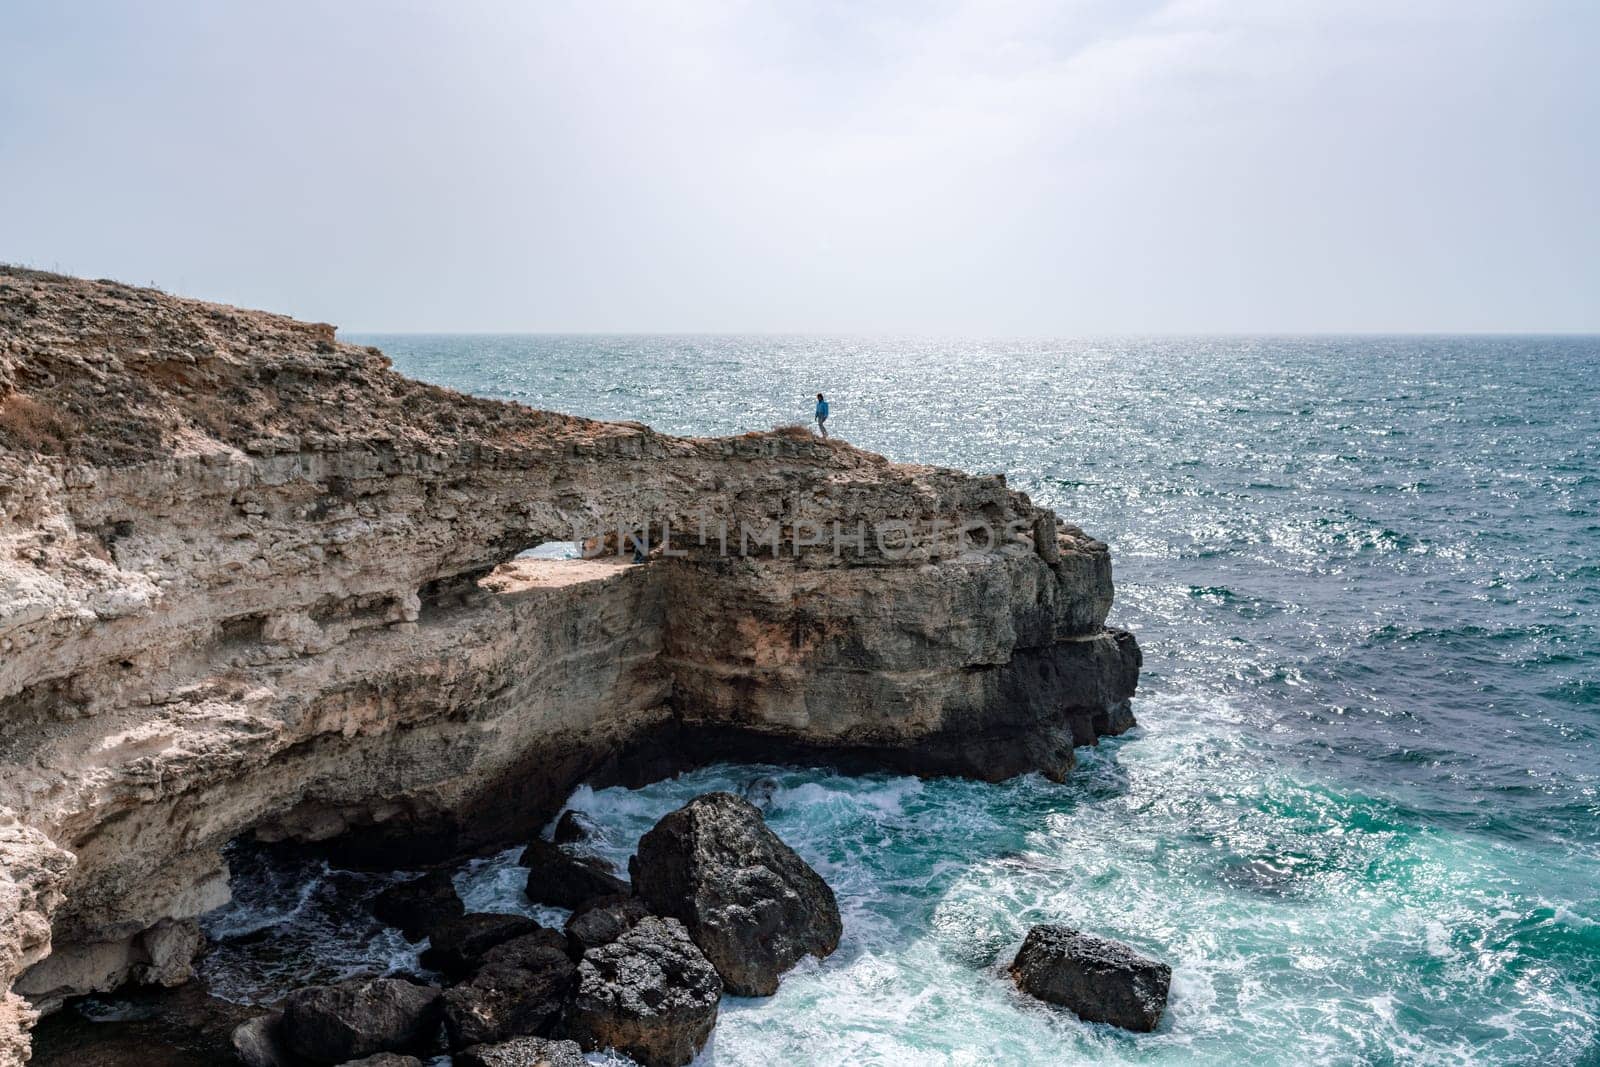 A rocky cliff overlooks the ocean, with the water crashing against the rocks. The scene is serene and peaceful, with the sound of the waves providing a calming atmosphere. by Matiunina